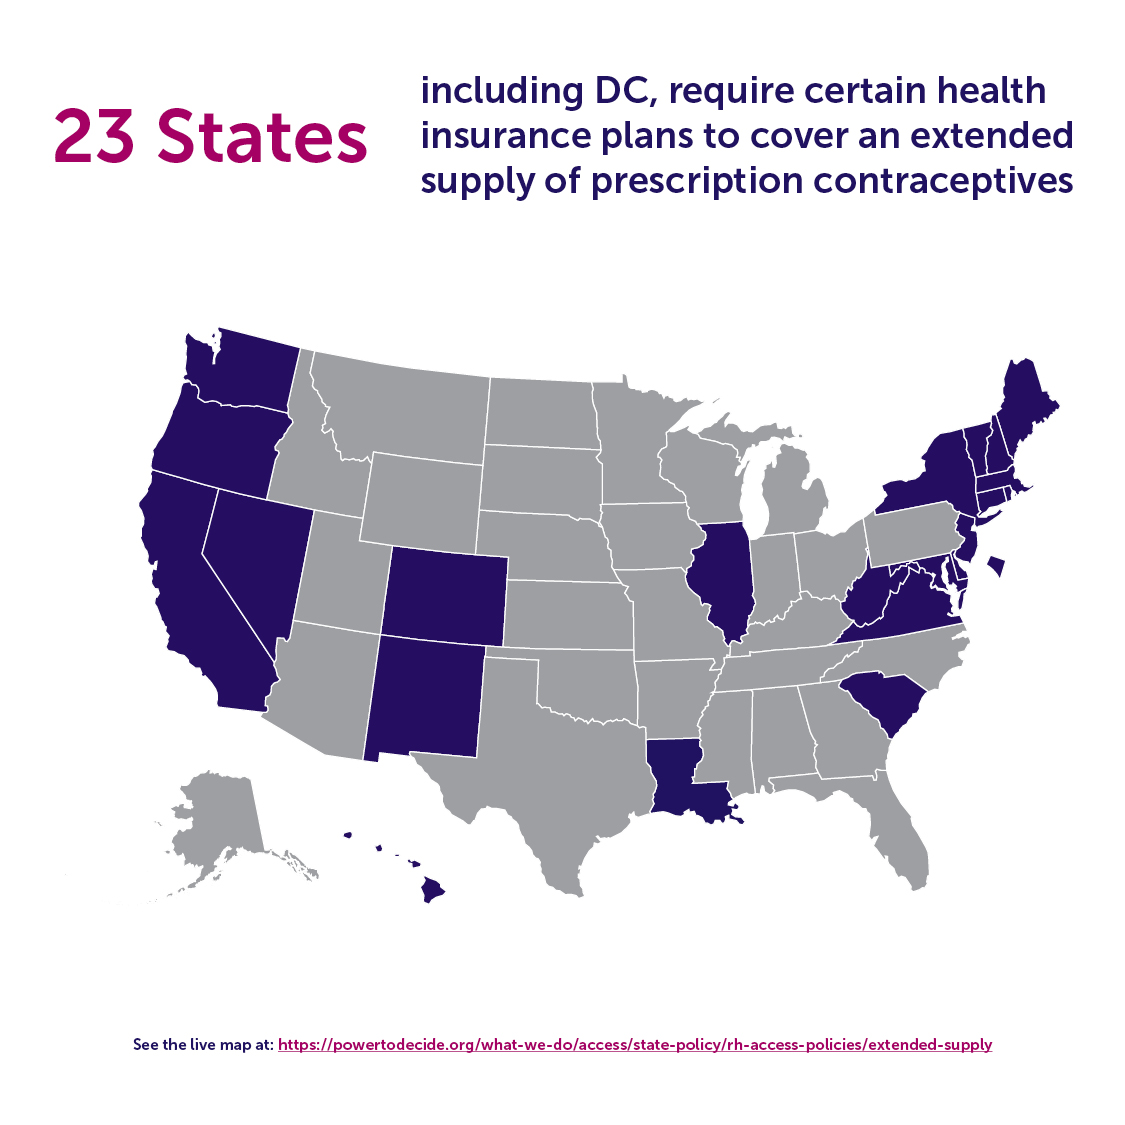 A map of the US showing which of the 23 states have extended supply of contraception. 